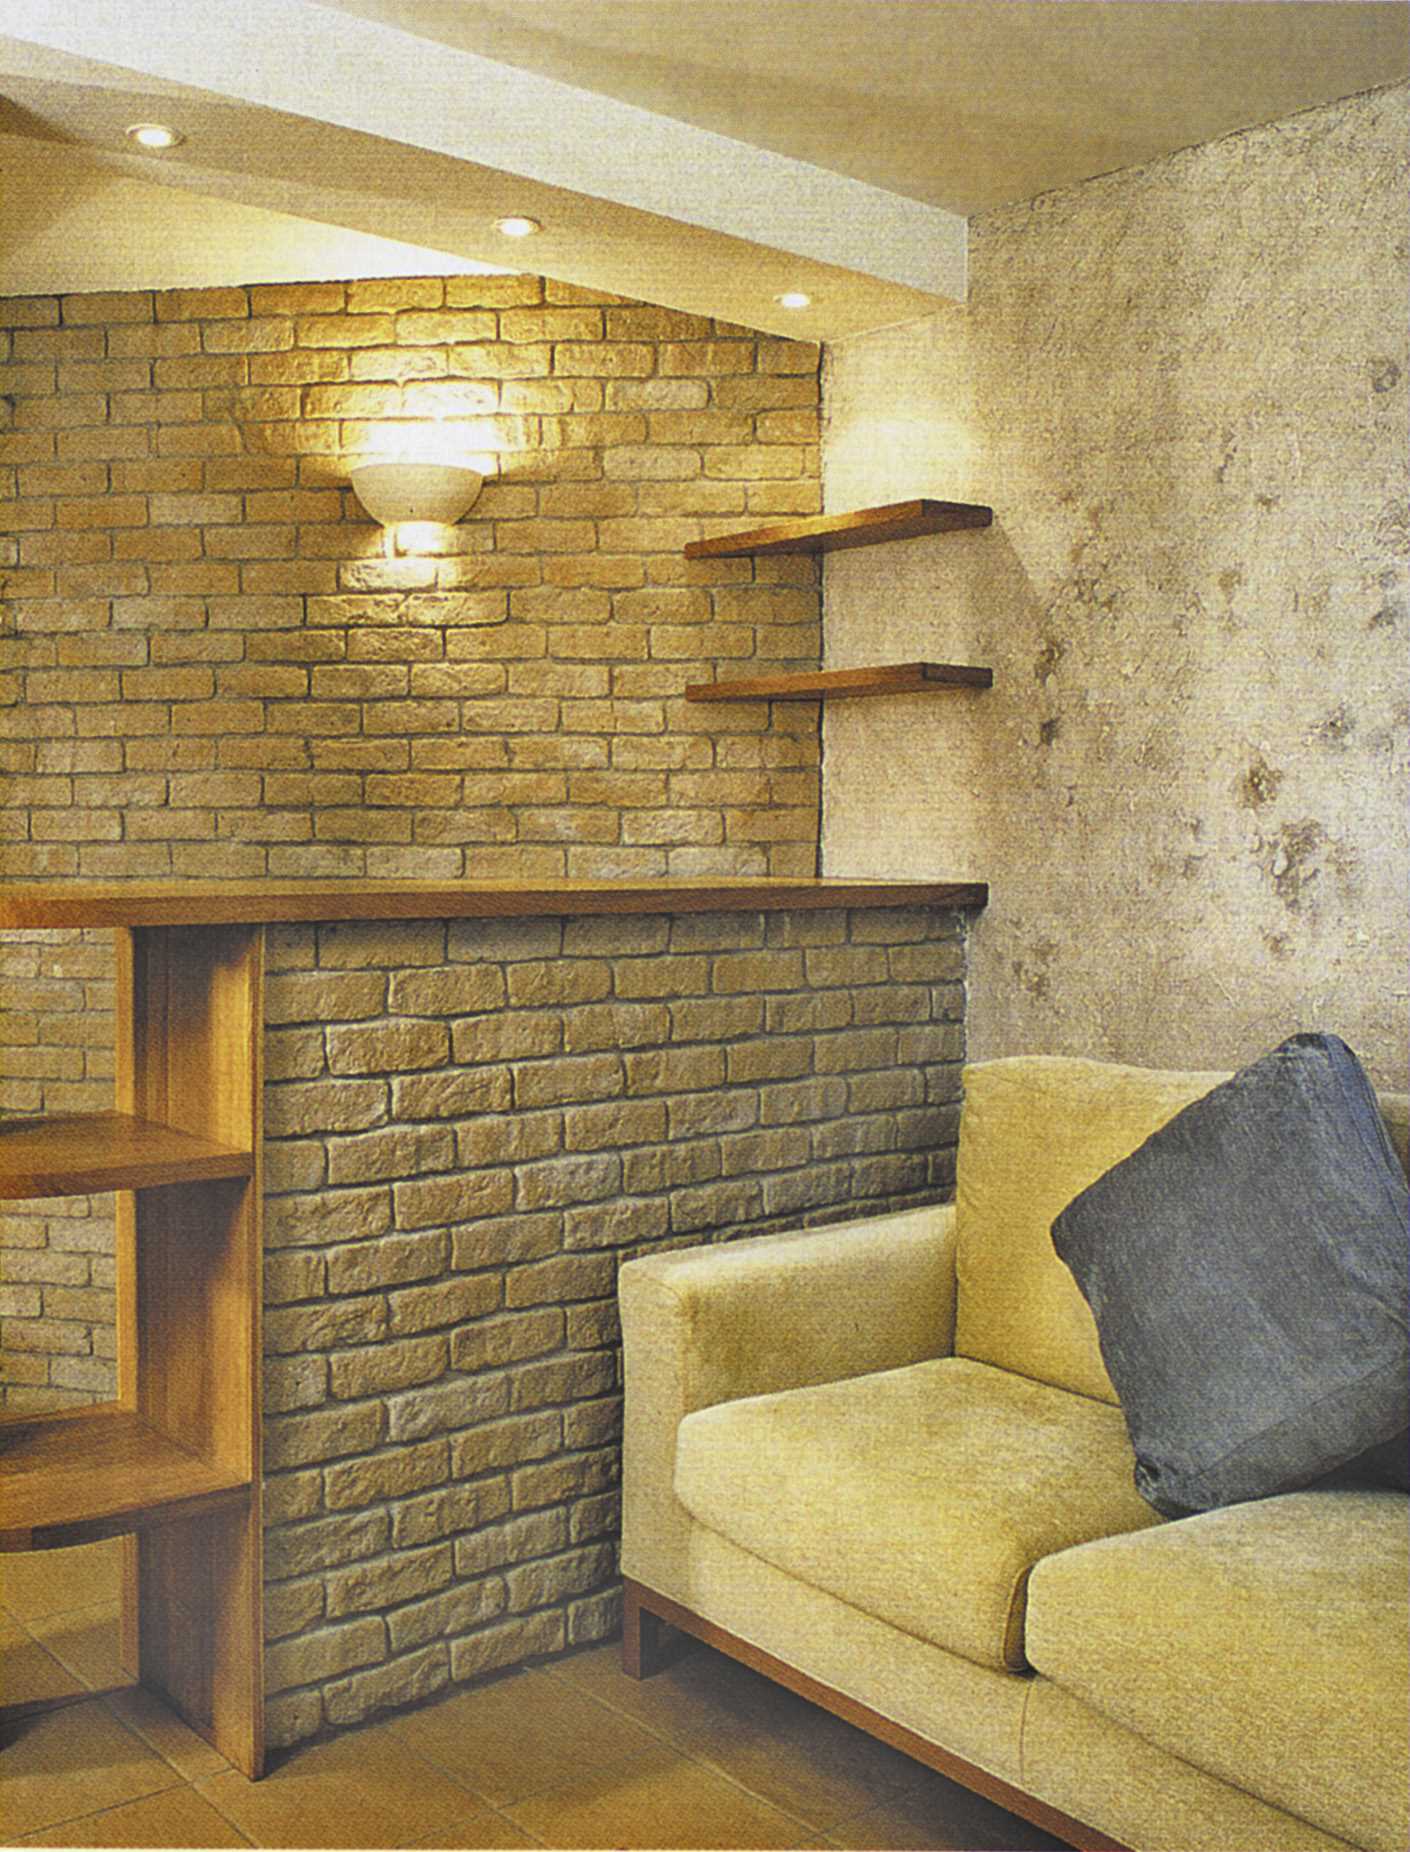 option of using unusual decorative brick in the style of the bedroom